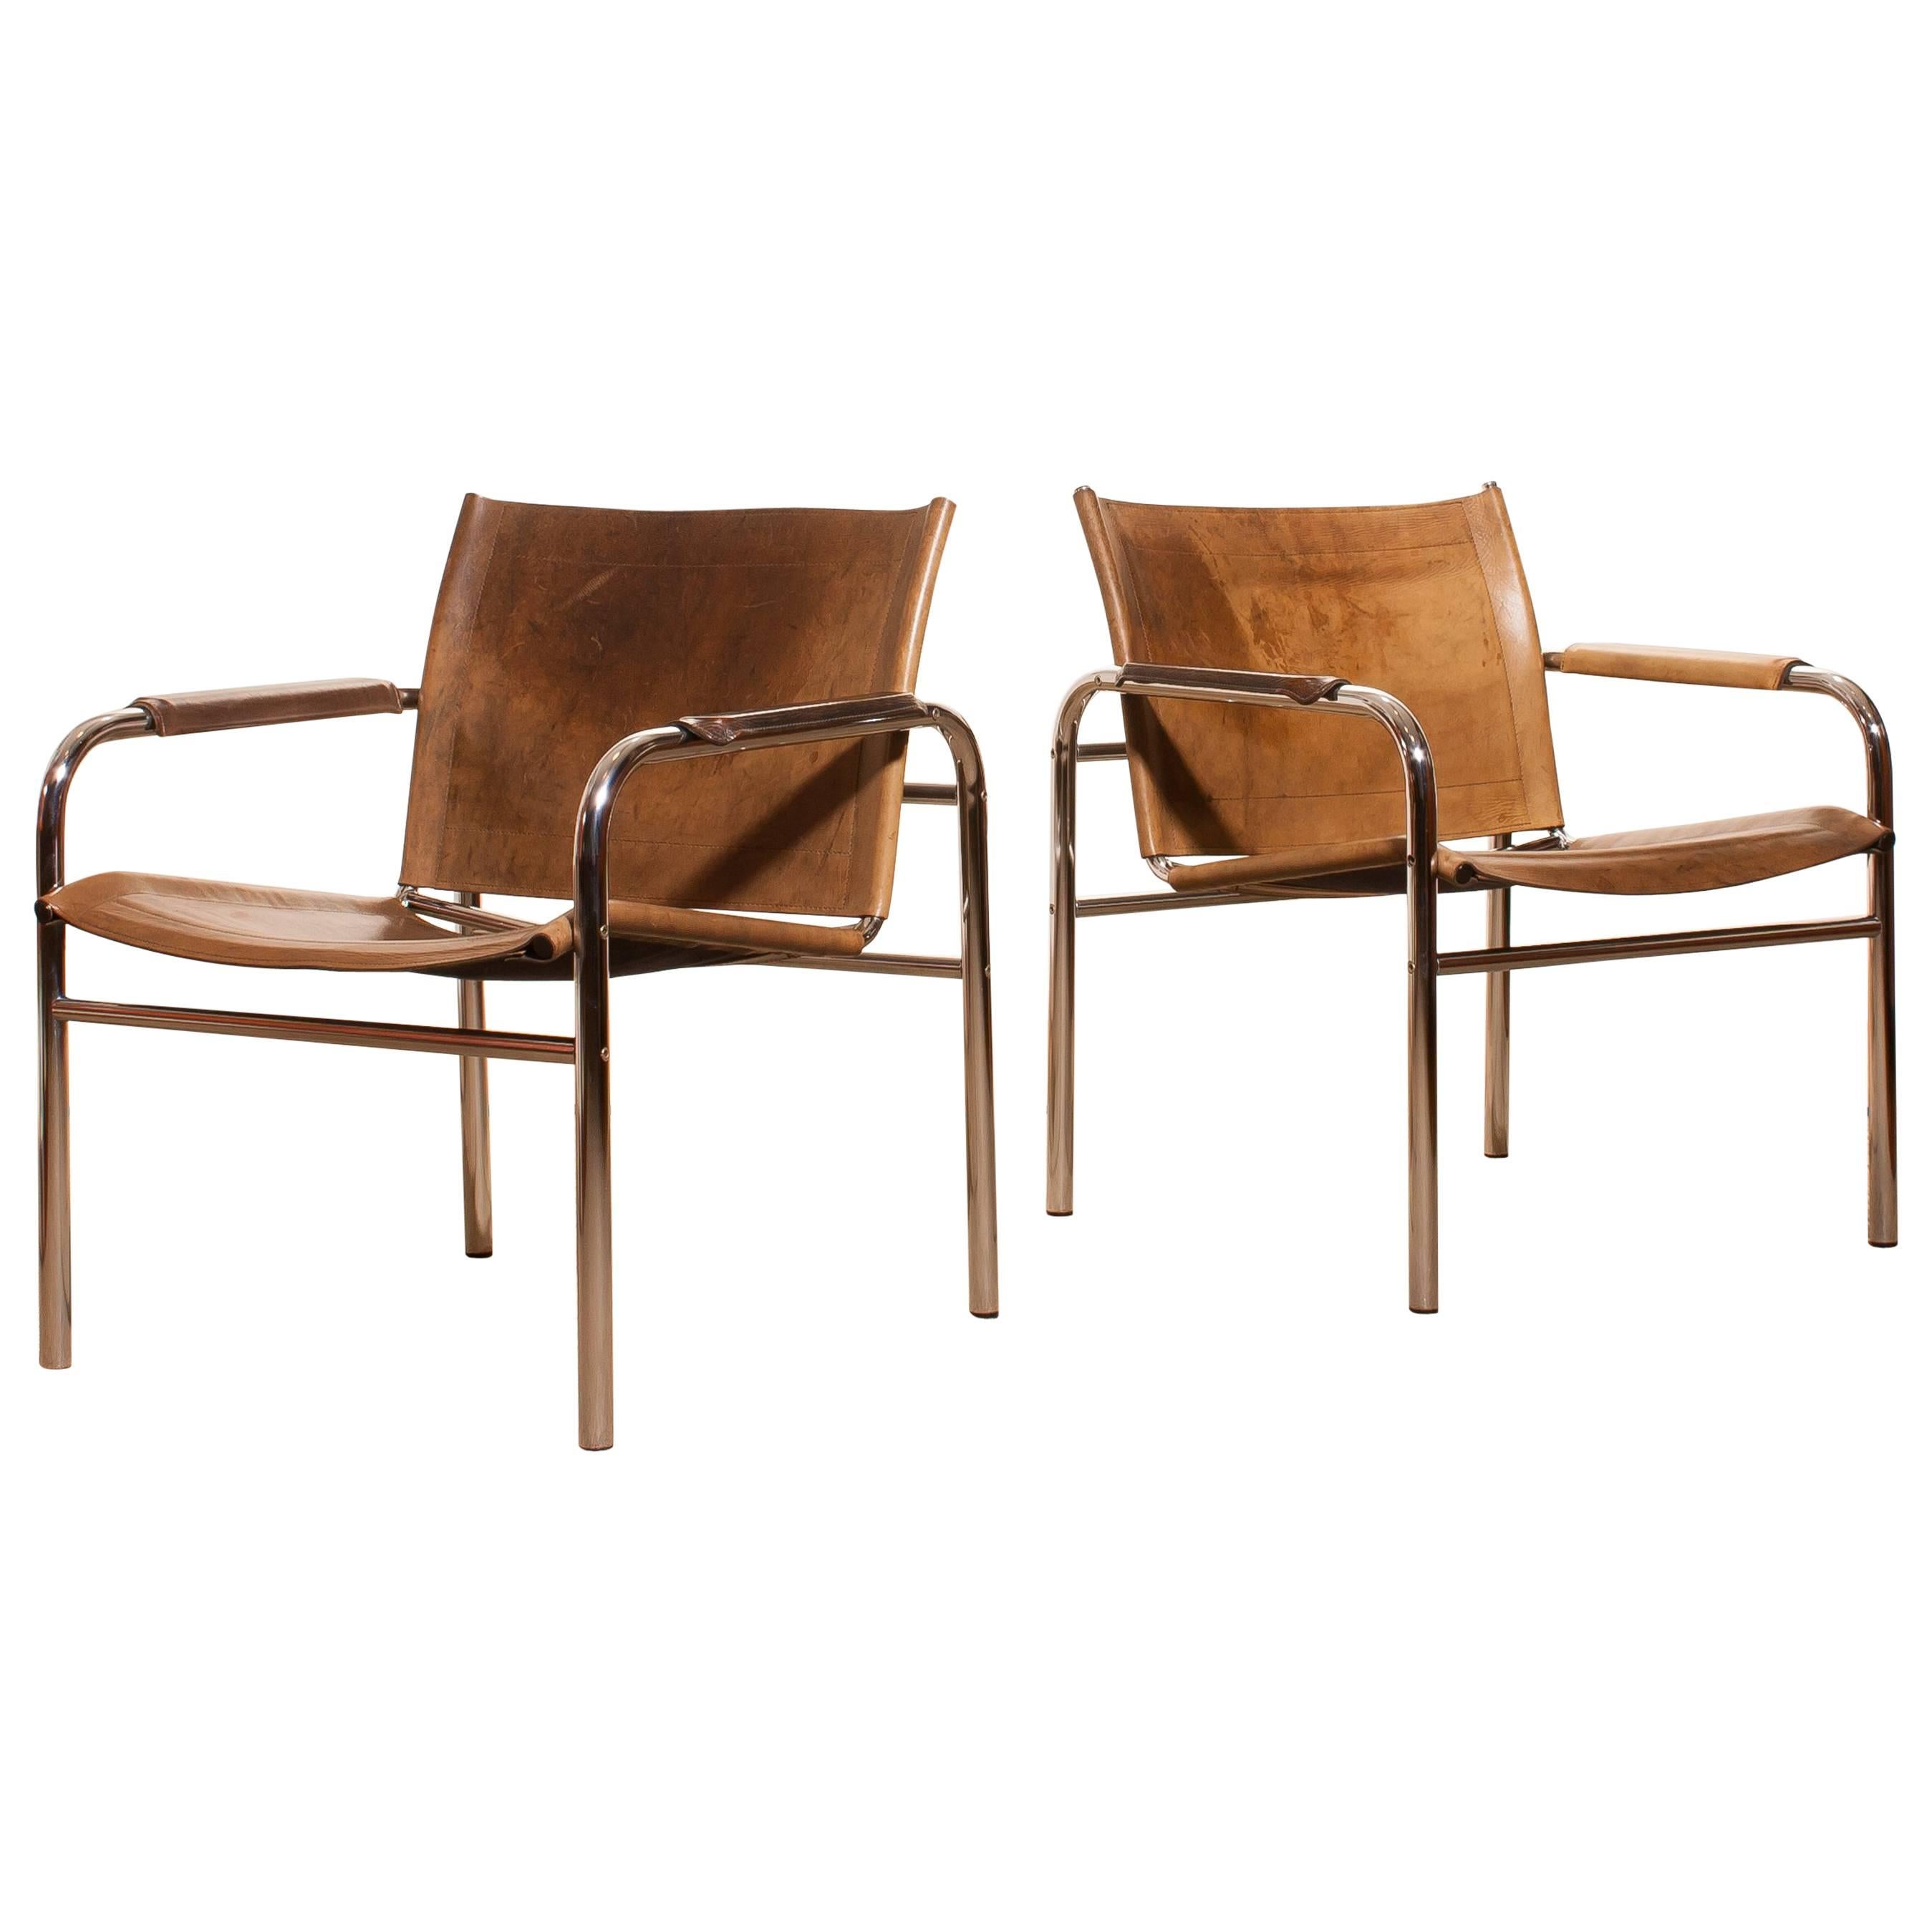 1960s , Two Leather and Tubular Steel Arm Chairs 'Klinte' by Tord Björklund